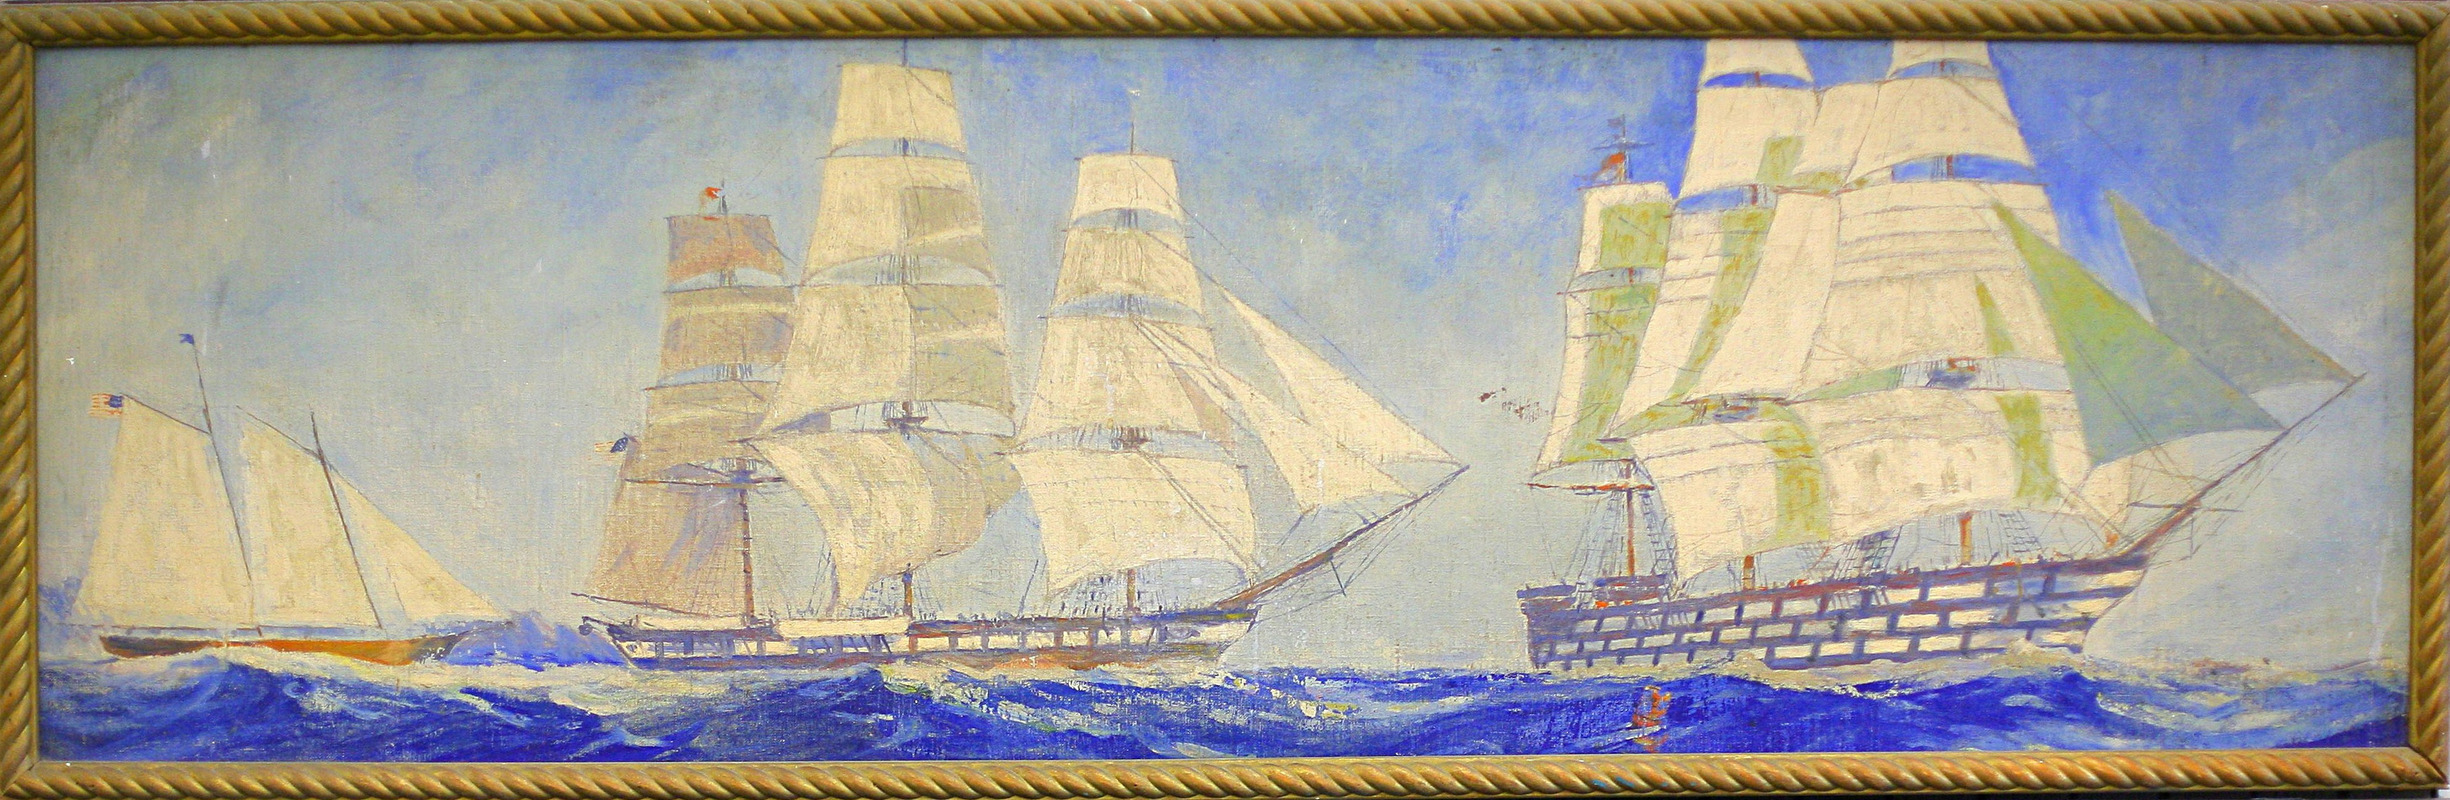 Ships Through the Ages: Yacht "America," Ships of the Line - "Pennsylvania" and "Cumberland"